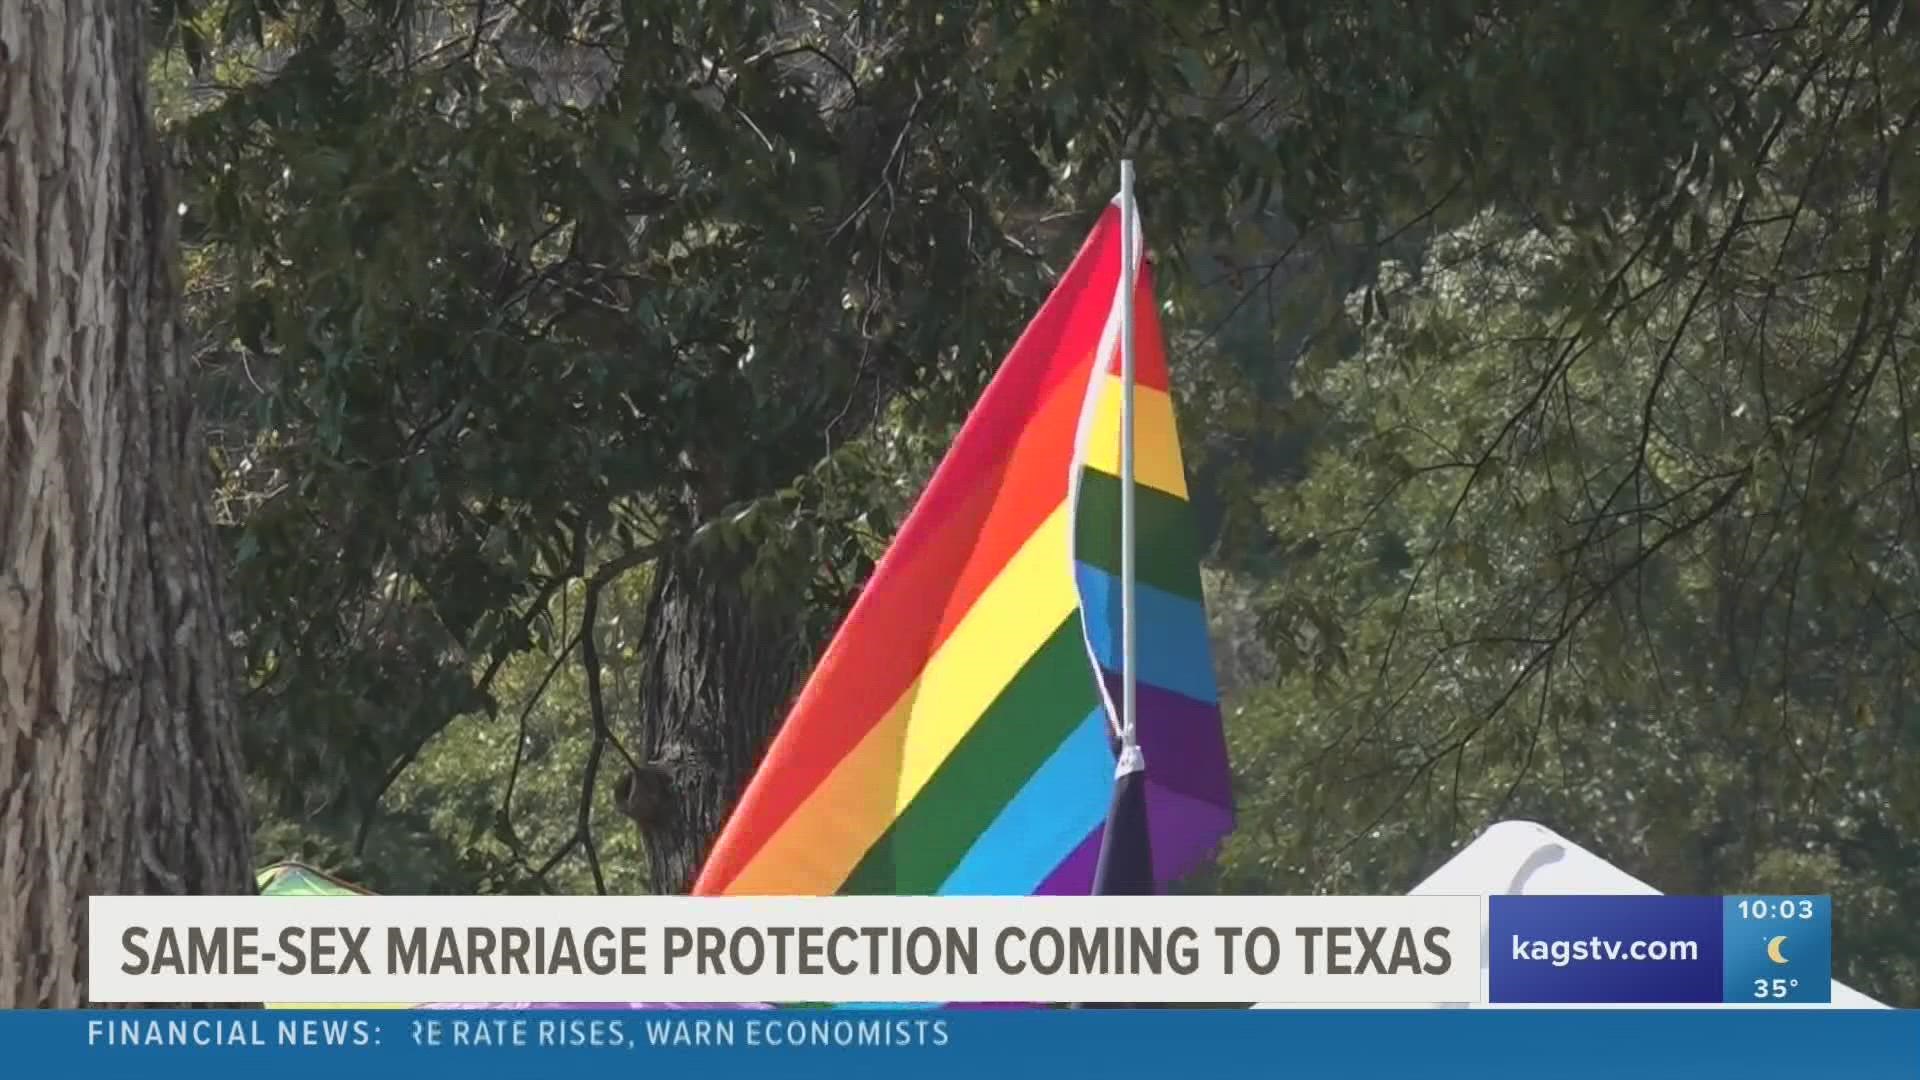 Tuesday night the Senate passed a landmark same-sex marriage bill that will affect people in the lone star state and across the country.